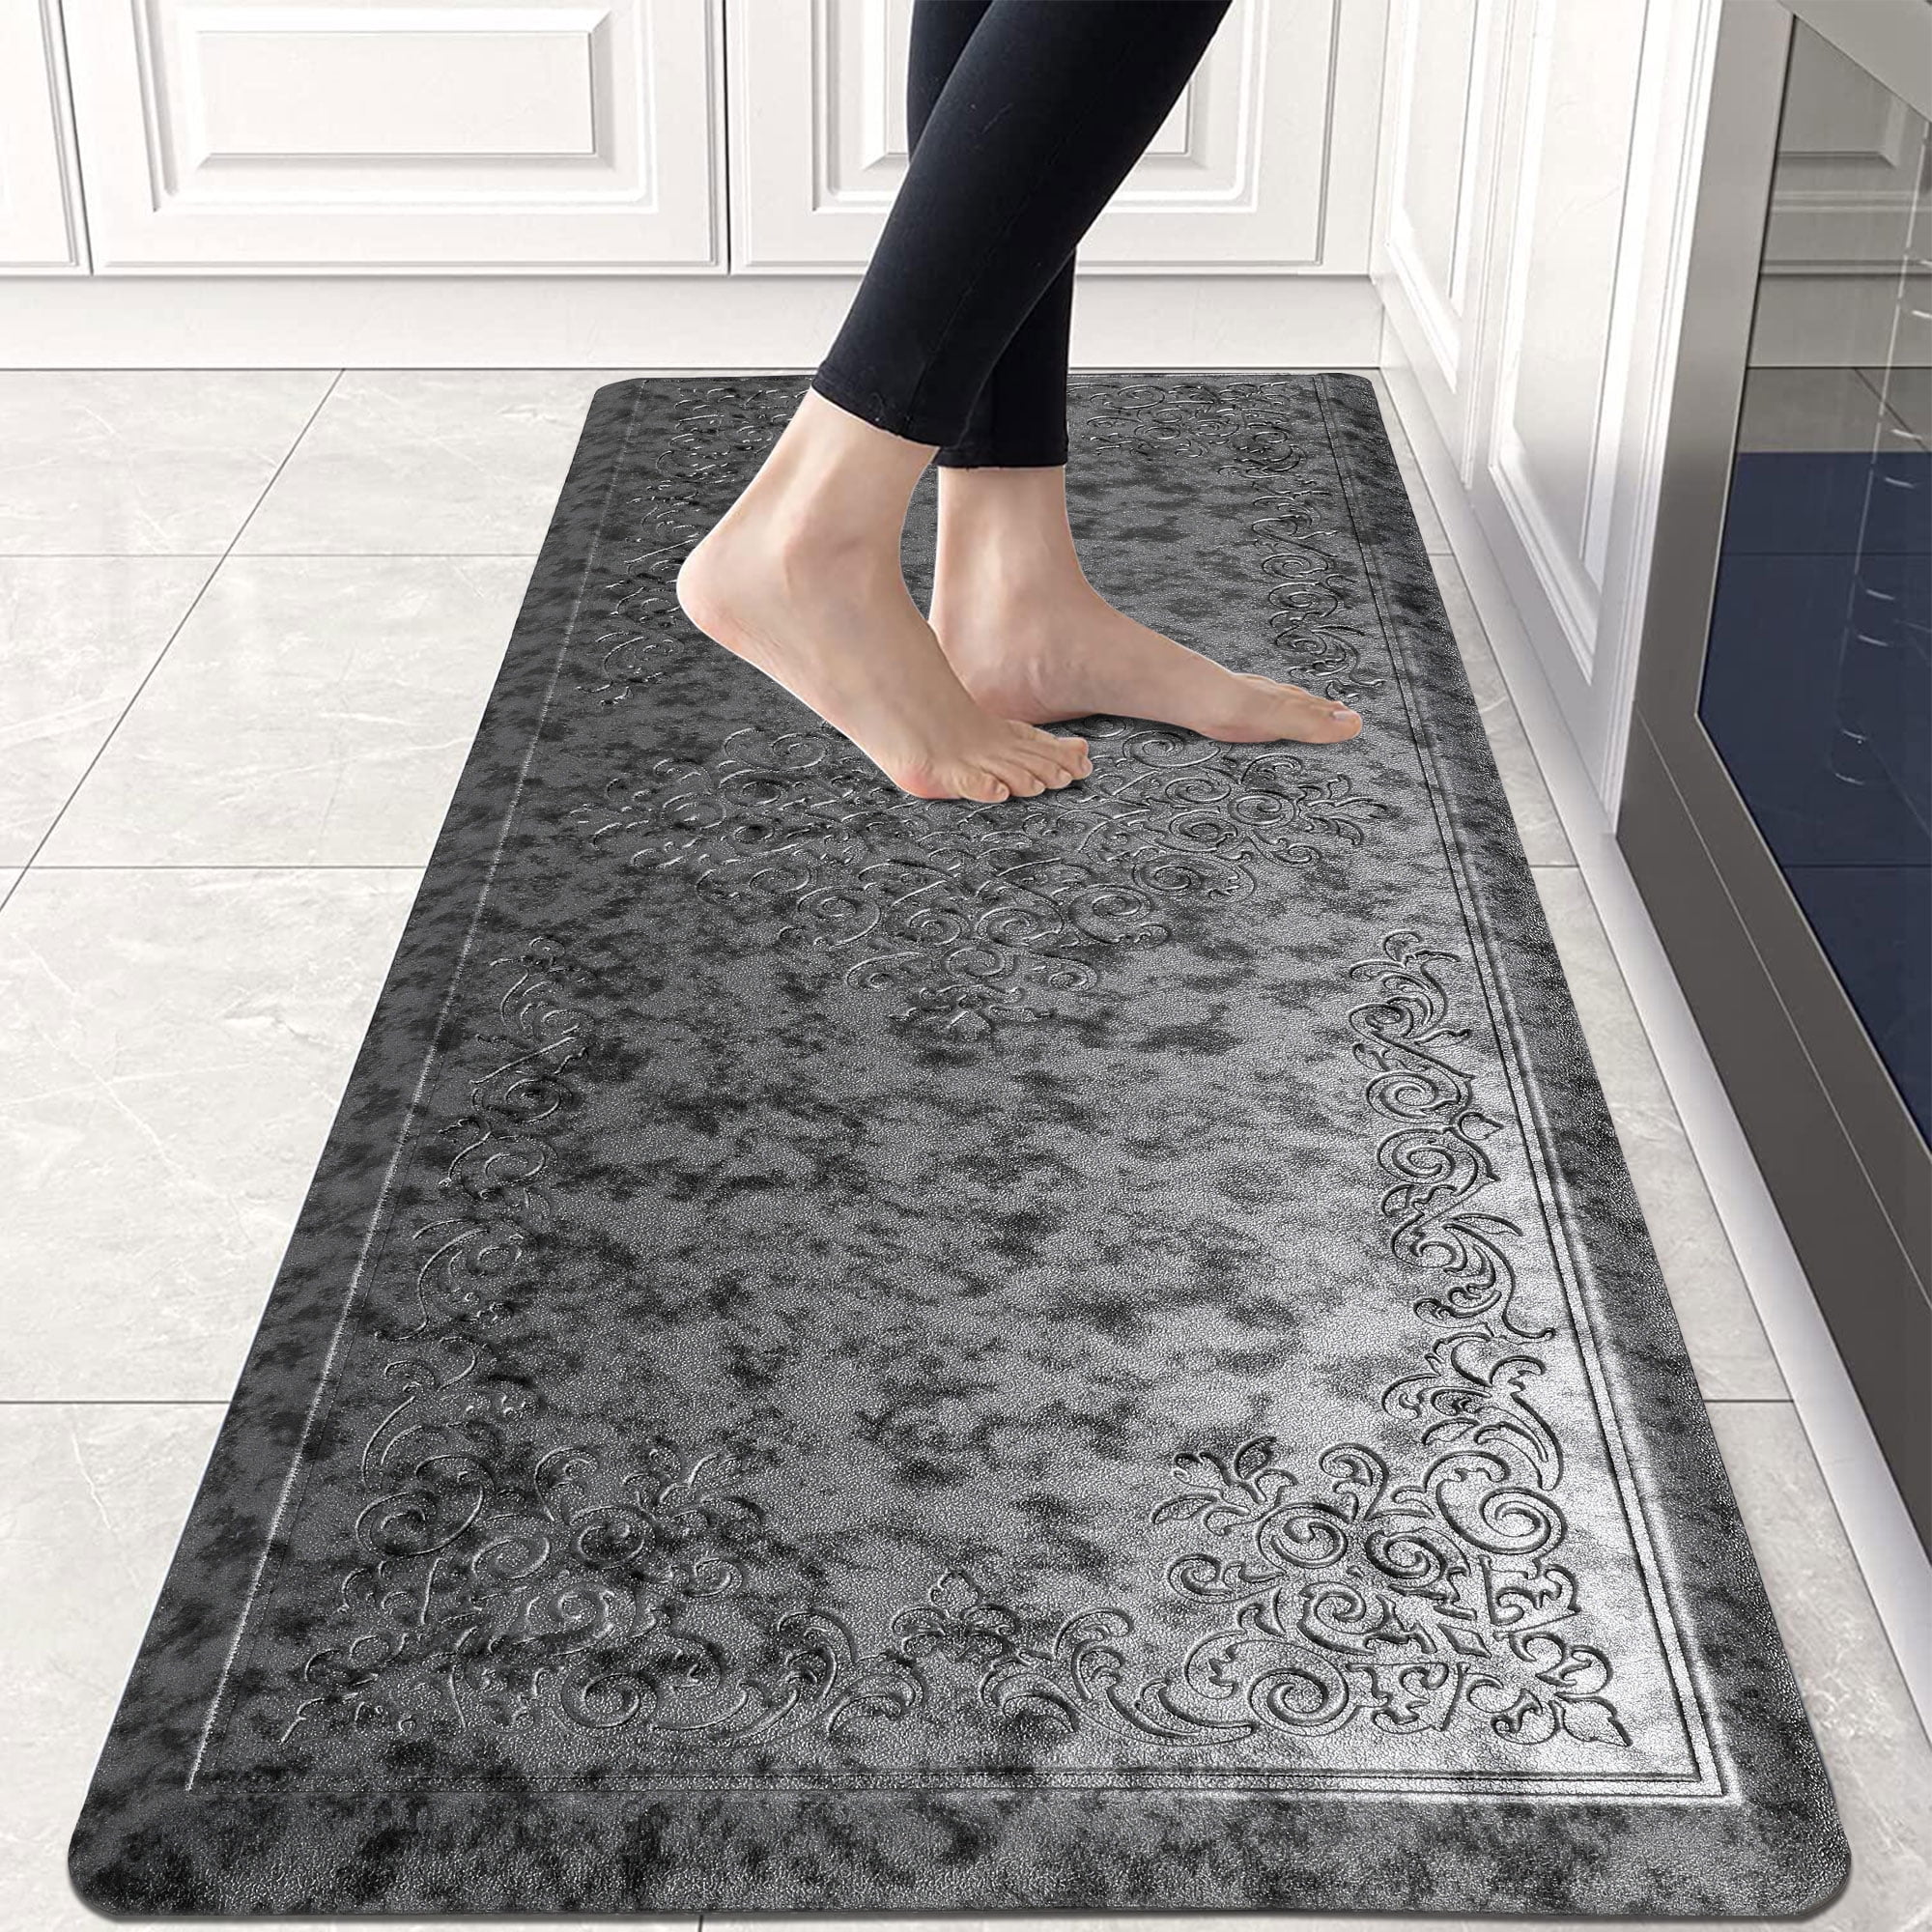 Kitchen Rugs, Non Skid Waterproof Kitchen Mats Anti-fatigue Thick Cushioned  Floor Rug( Size,color : 45x75cm-grey